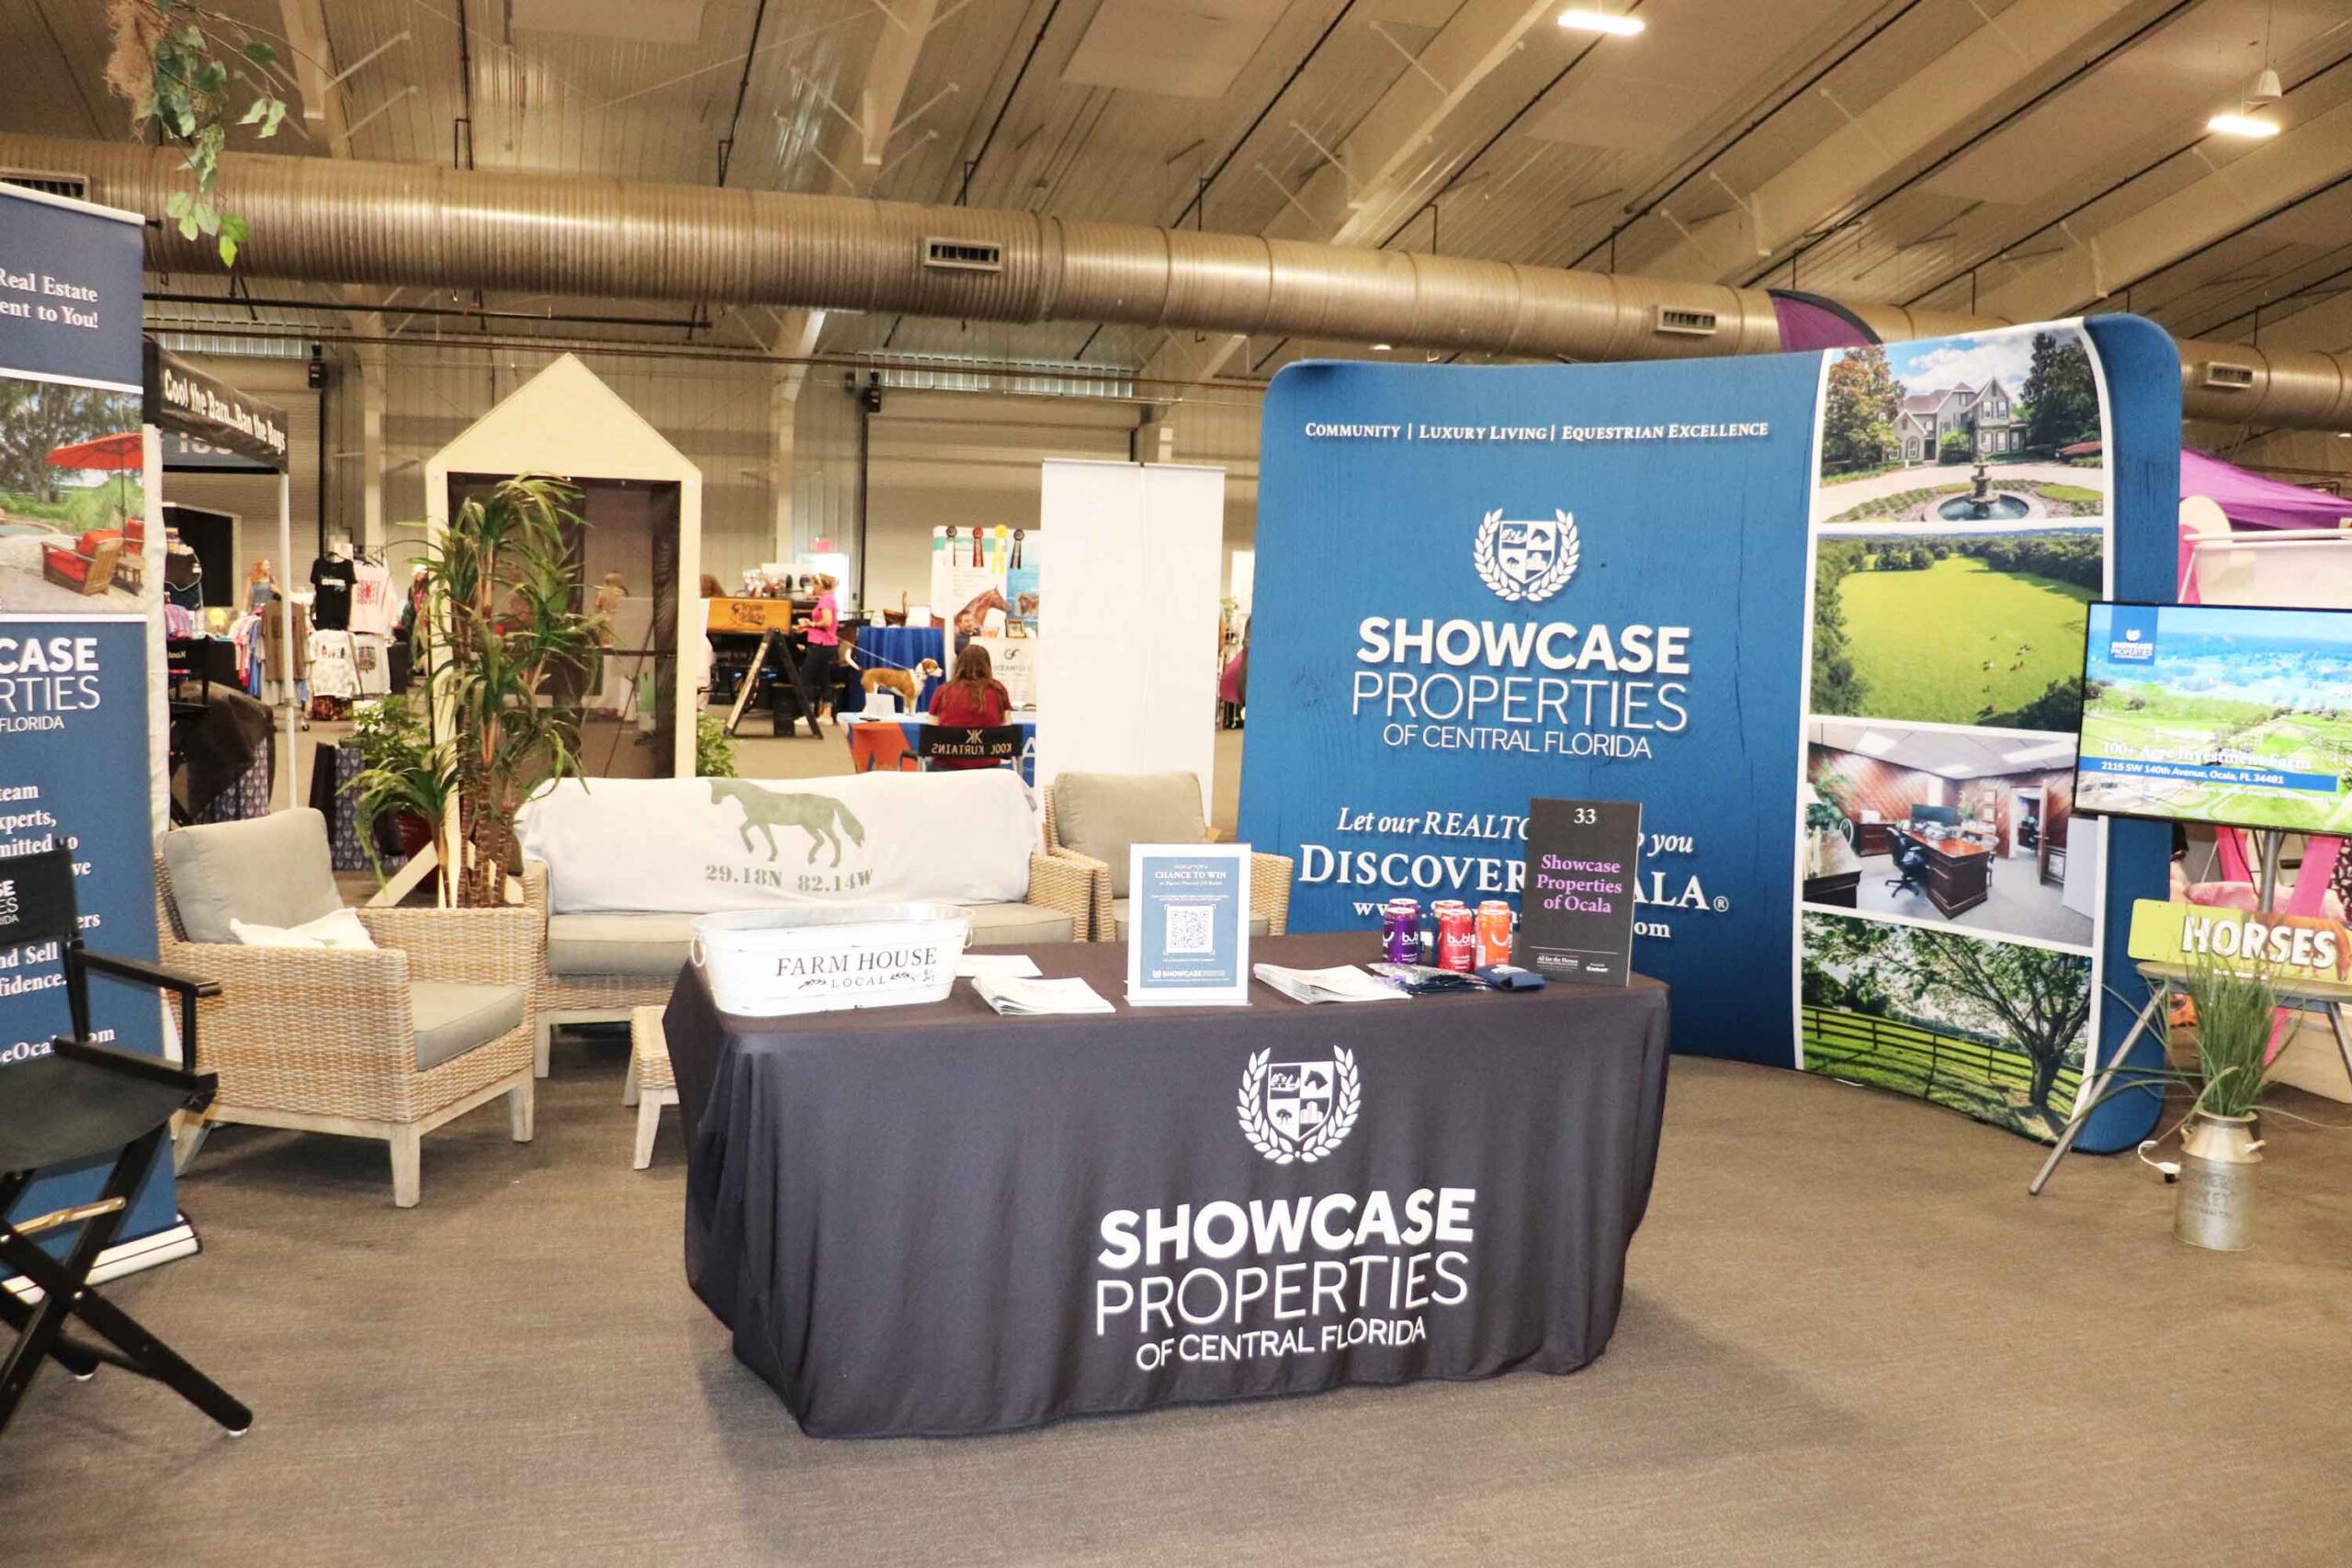 The Showcase booth at the Equine expo